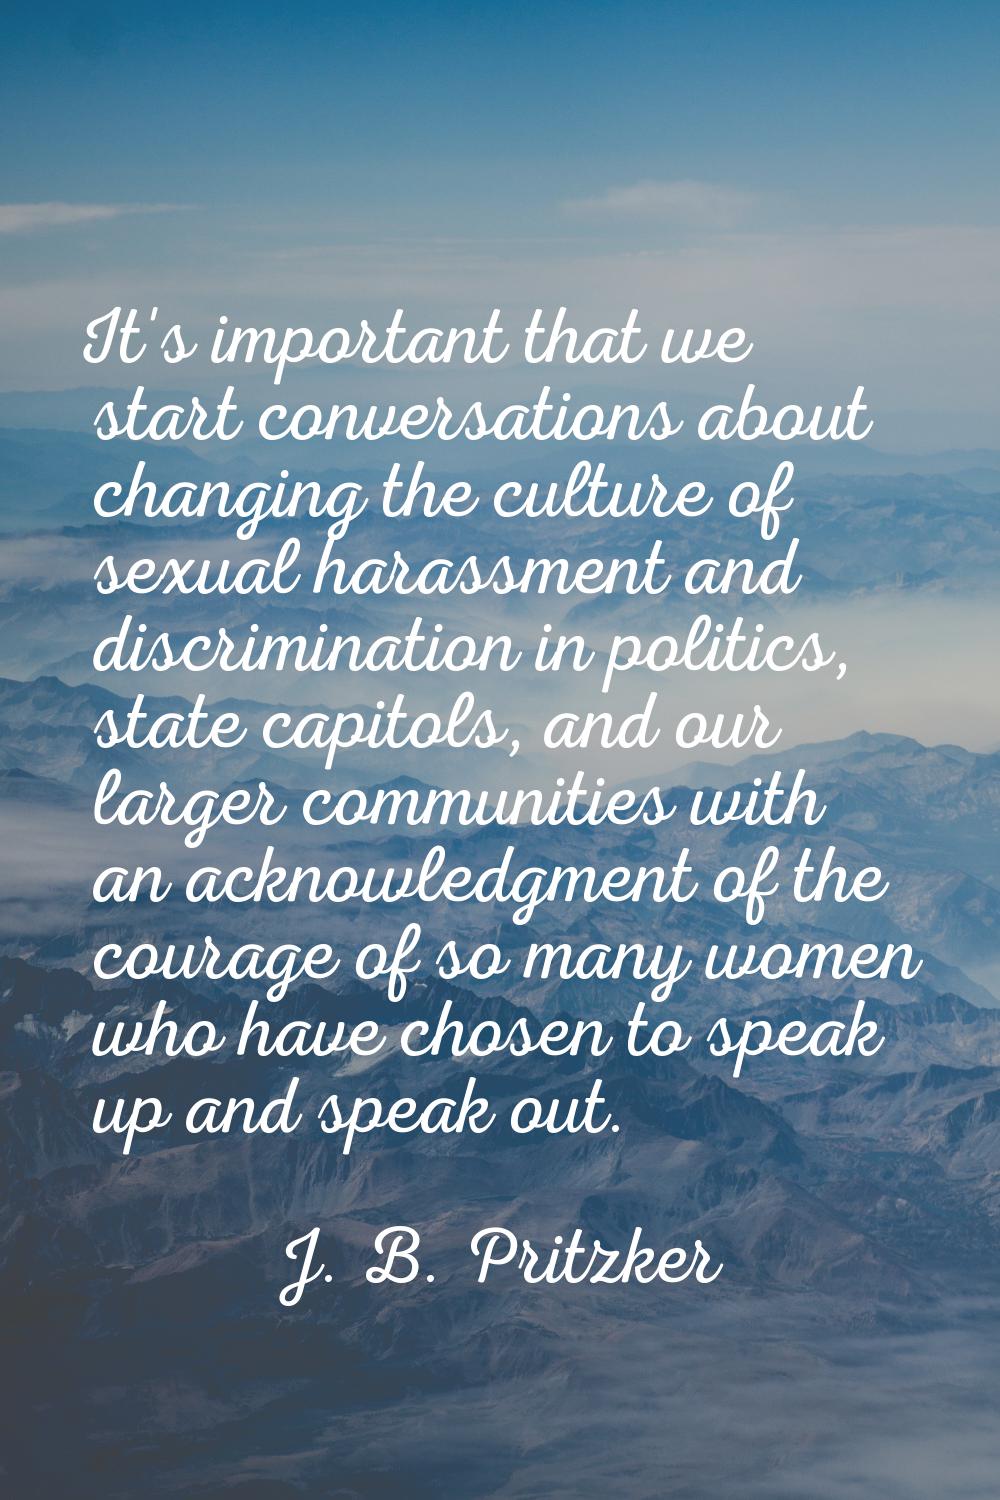 It's important that we start conversations about changing the culture of sexual harassment and disc